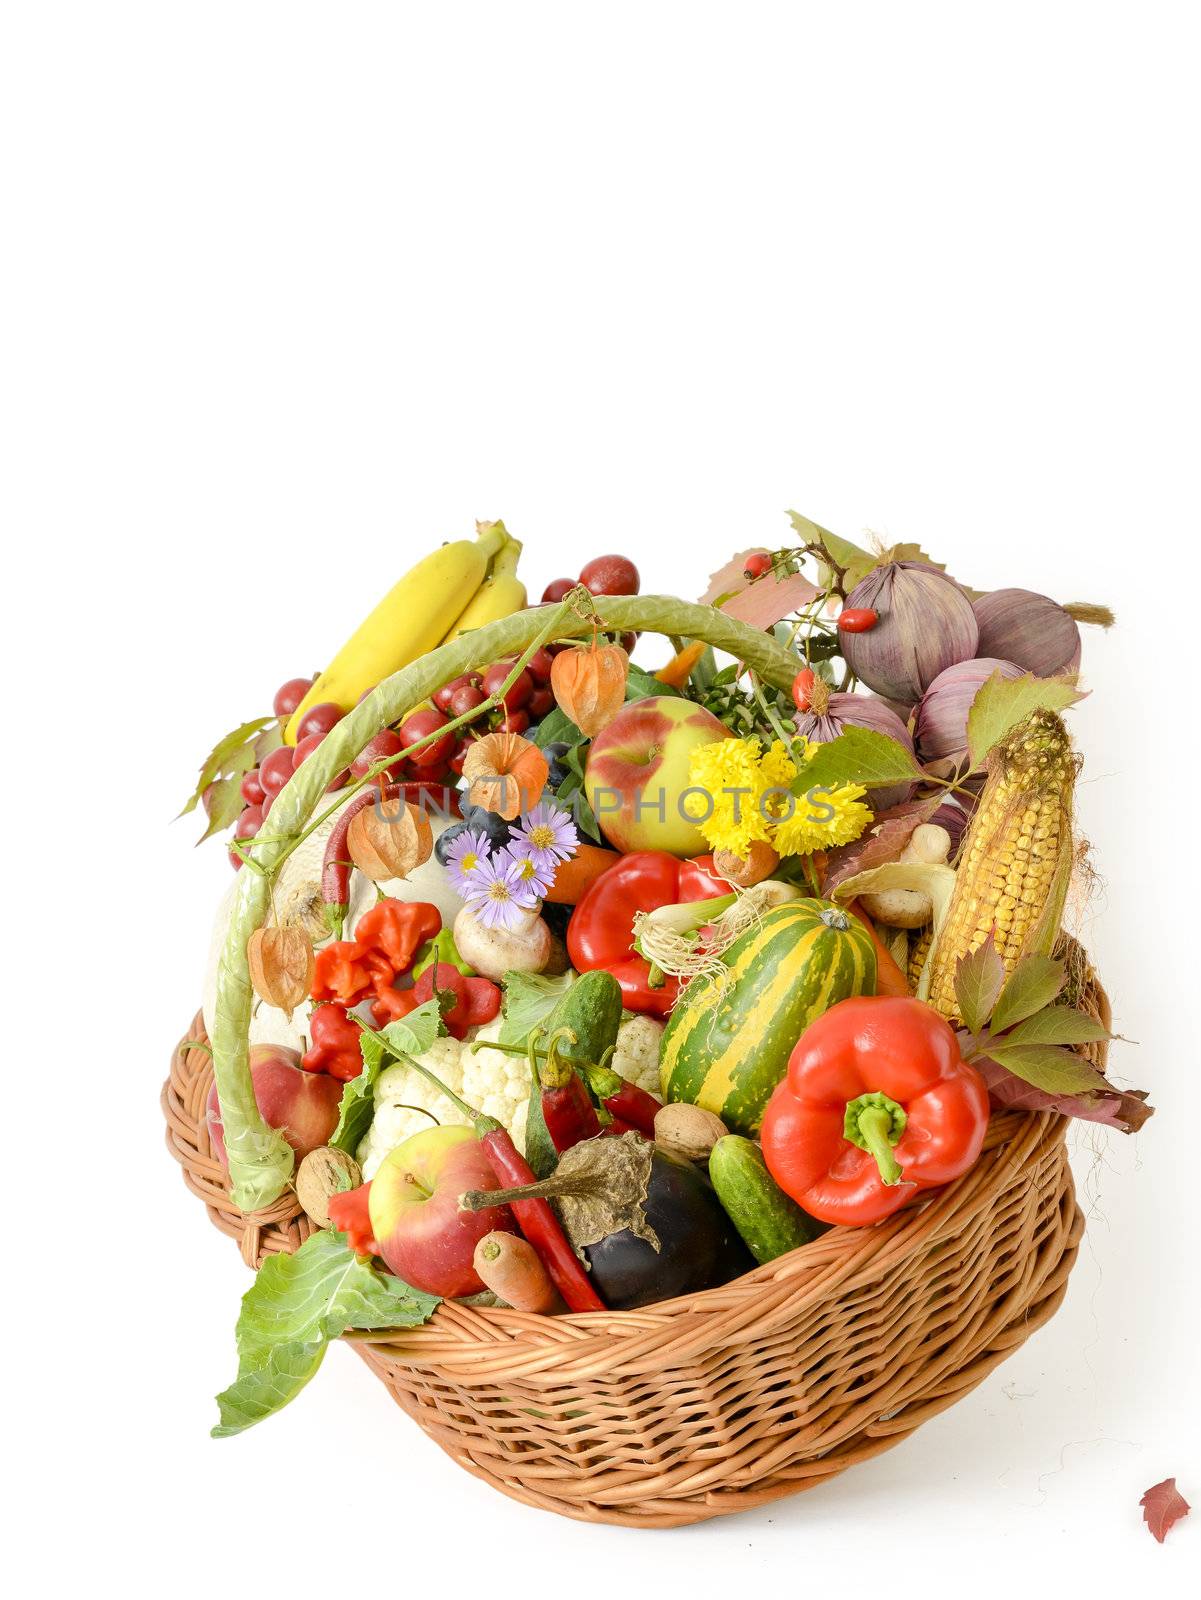 Basket with vegetables and fruits by manaemedia